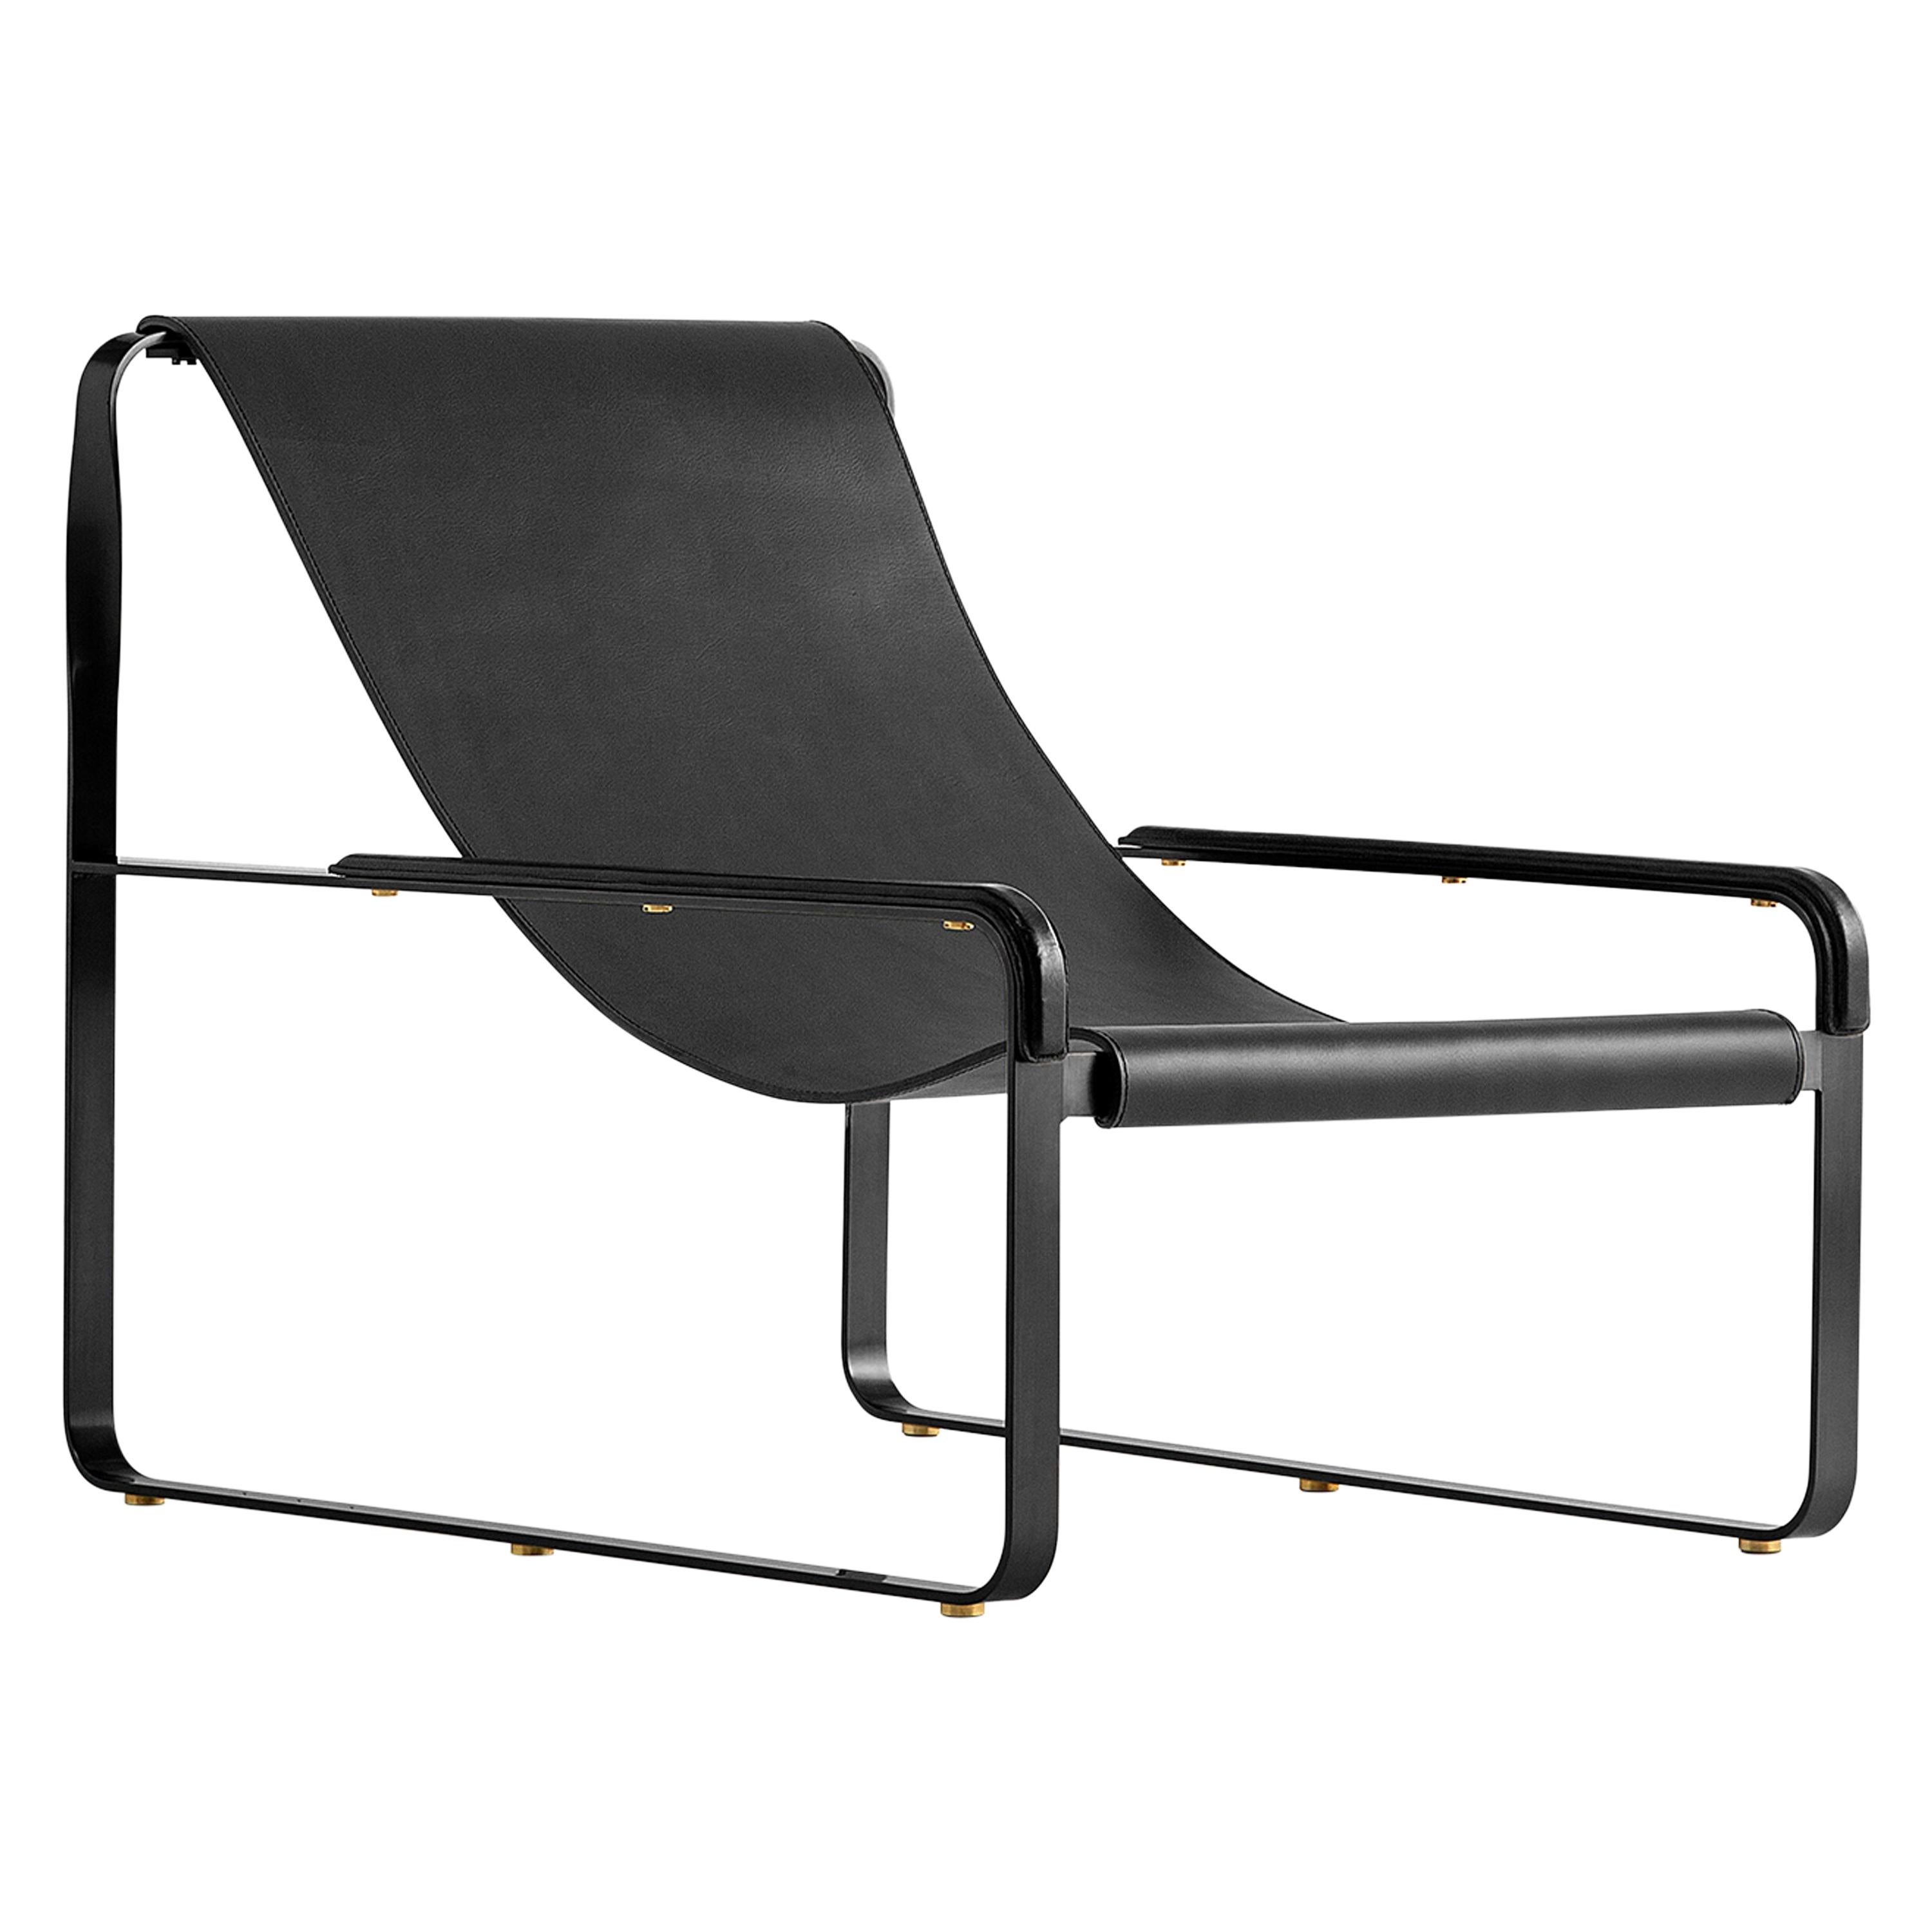 Classic Minimal Contemporary Chaise Lounge Black Smoke Metal & Black Leather For Sale